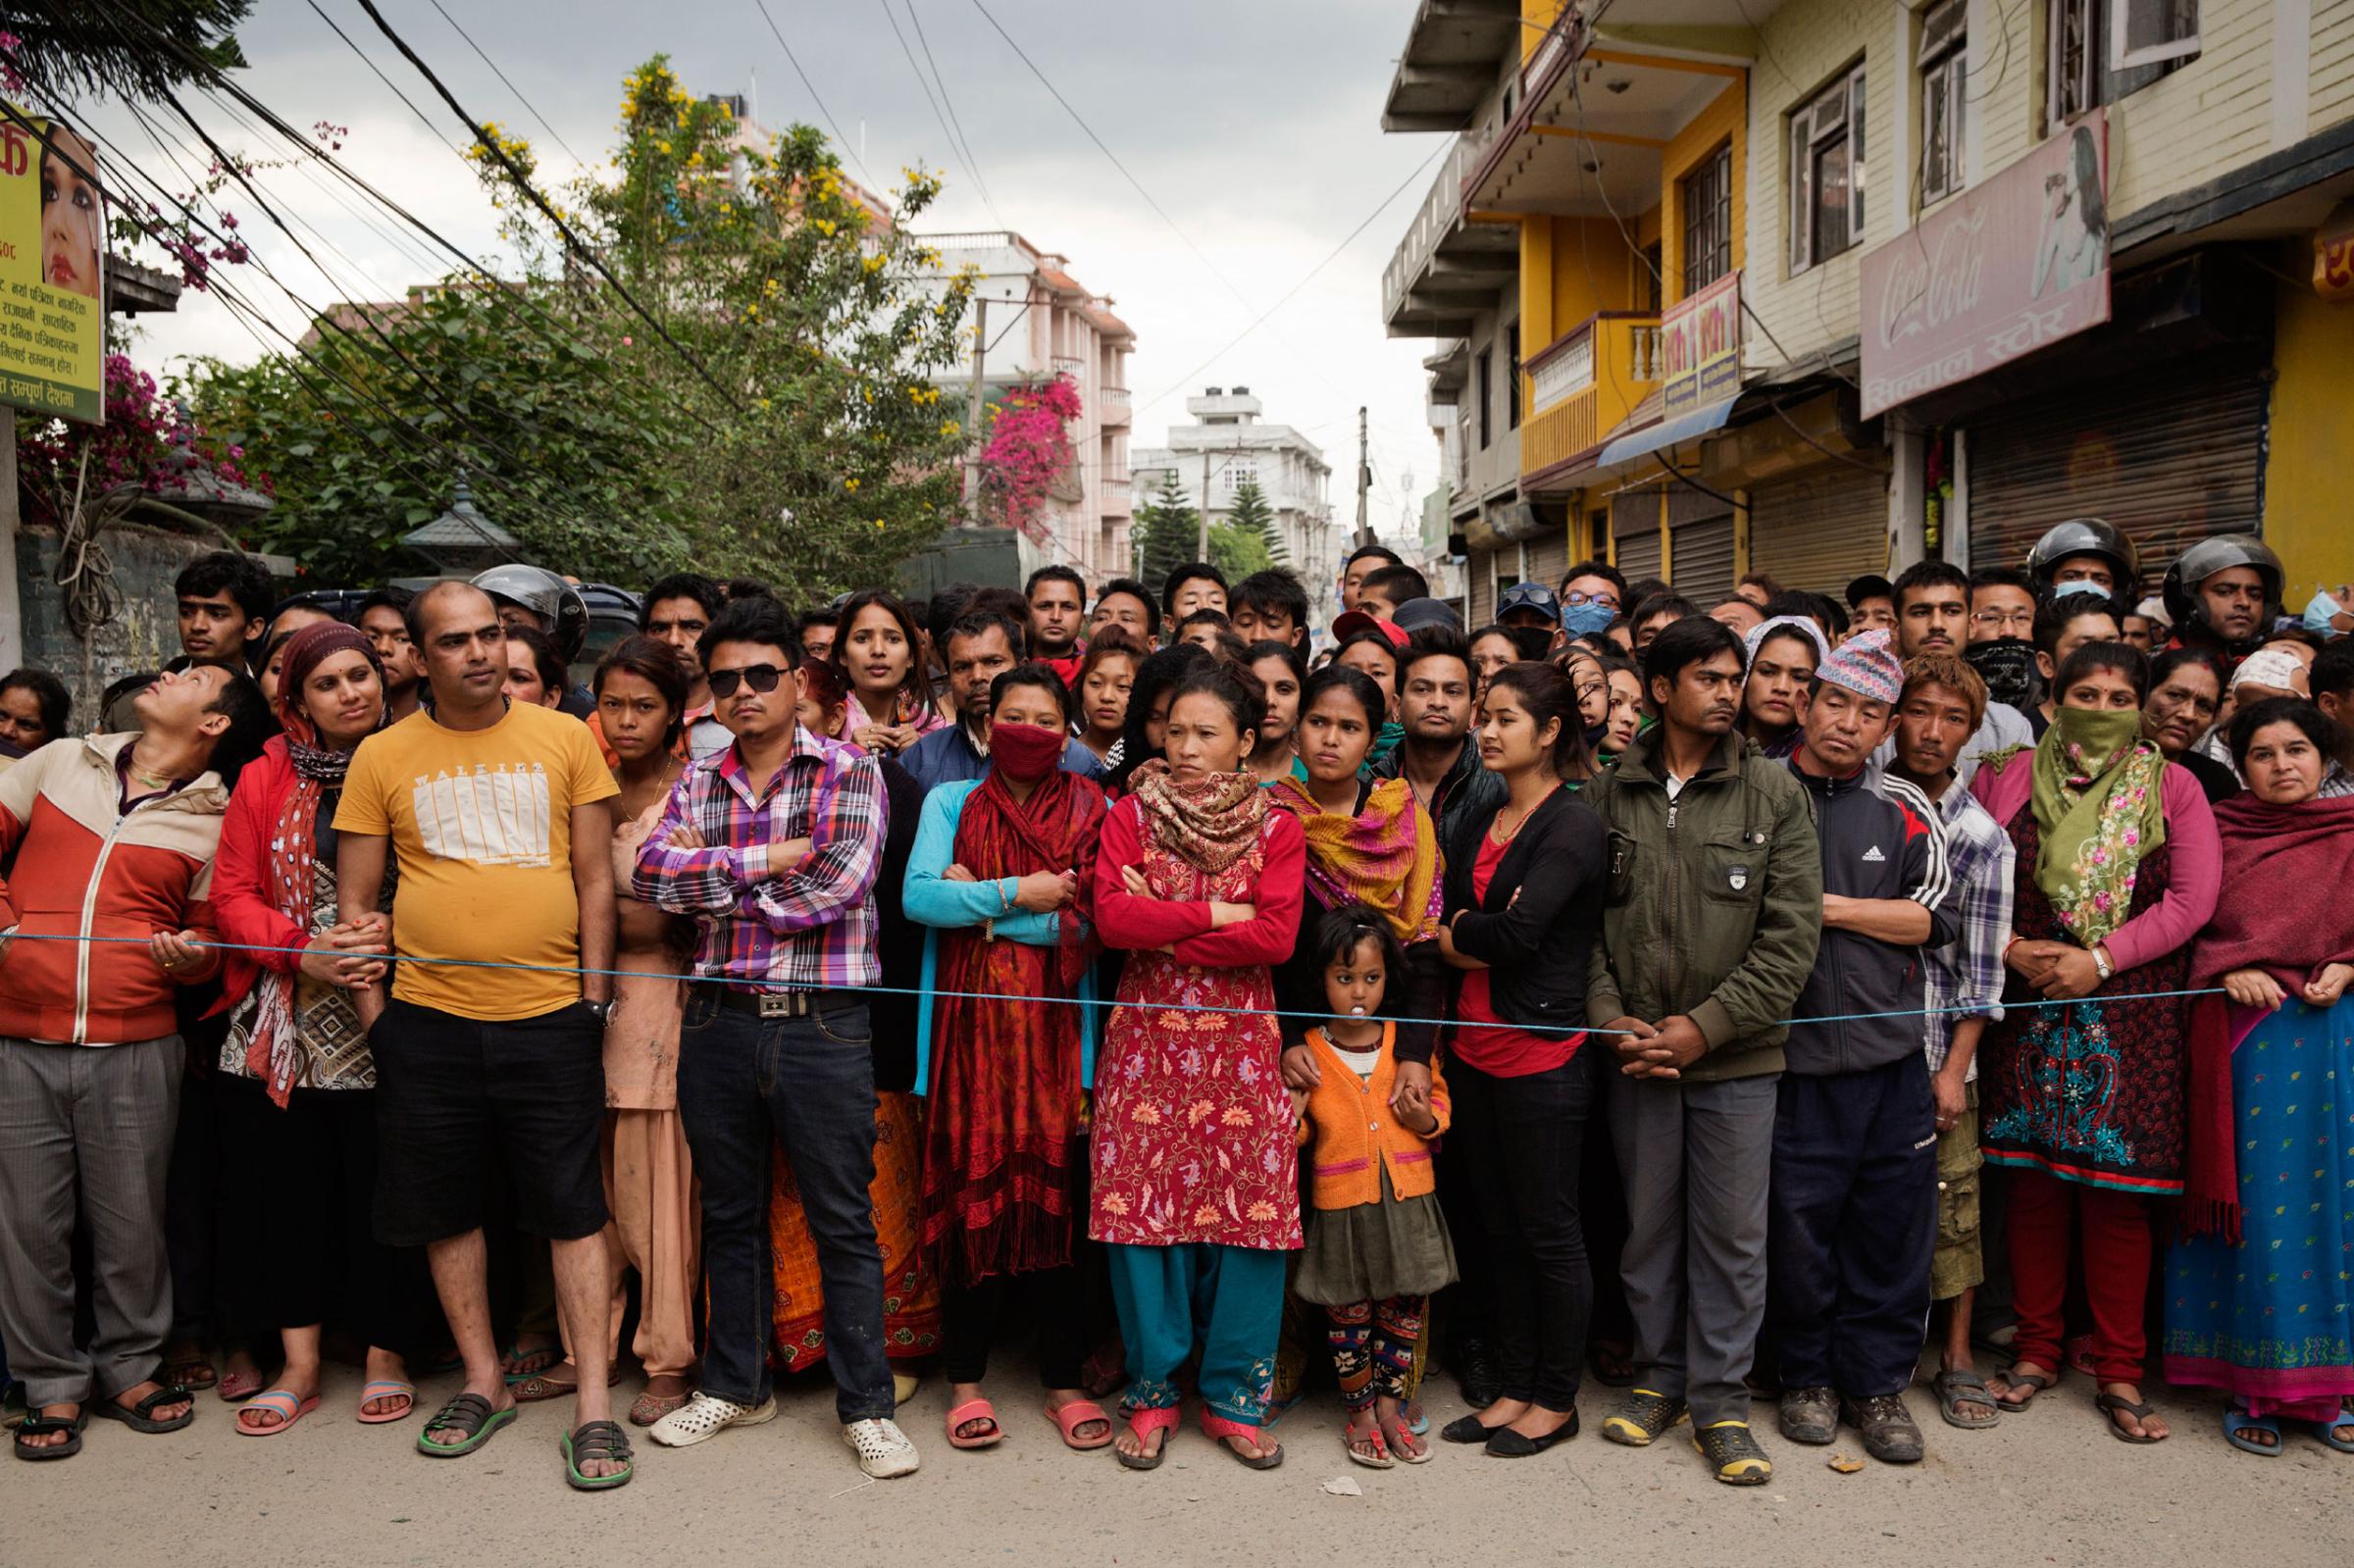 A crowd watches Indian forces excavating collapsed apartments looking for bodies and survivors of Saturdays Earthquake, in Kathmandu, Nepal on April. 27, 2015. Nepal had a severe earthquake on April 25th. Photo by Adam Ferguson for Time